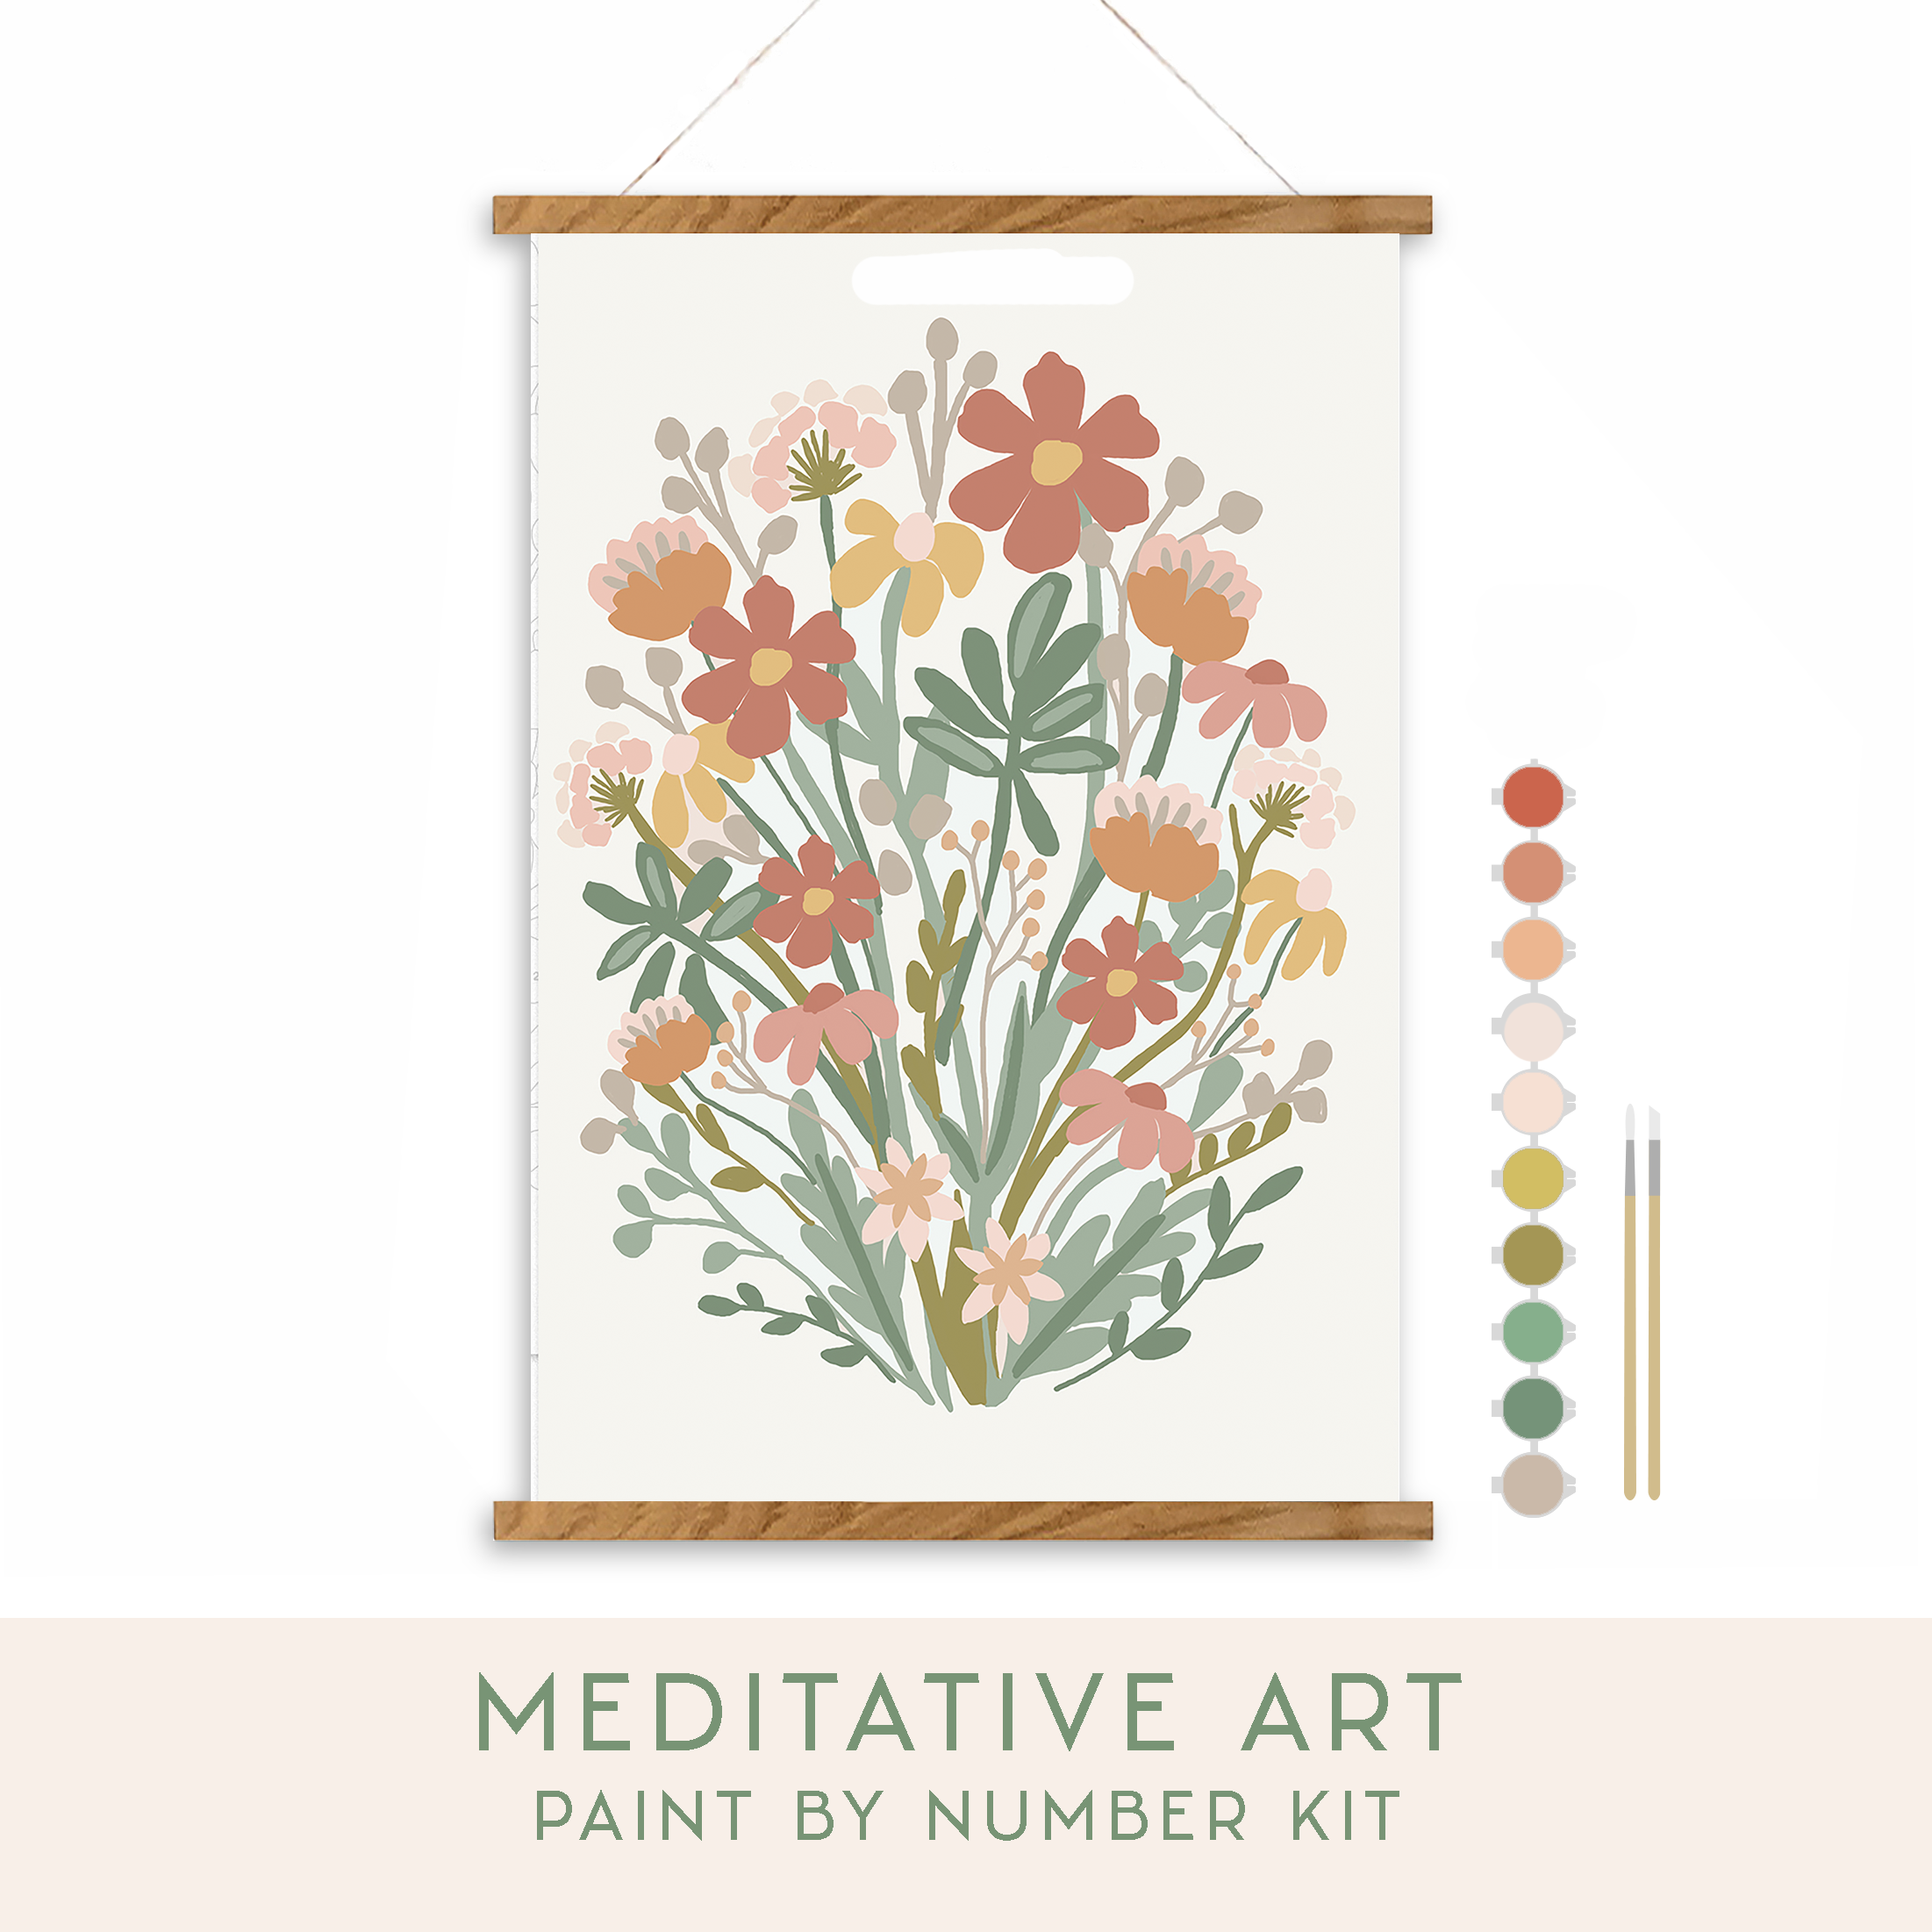 Wildflowers Meditative Art Paint by Number Kit: Paint by Number Kit